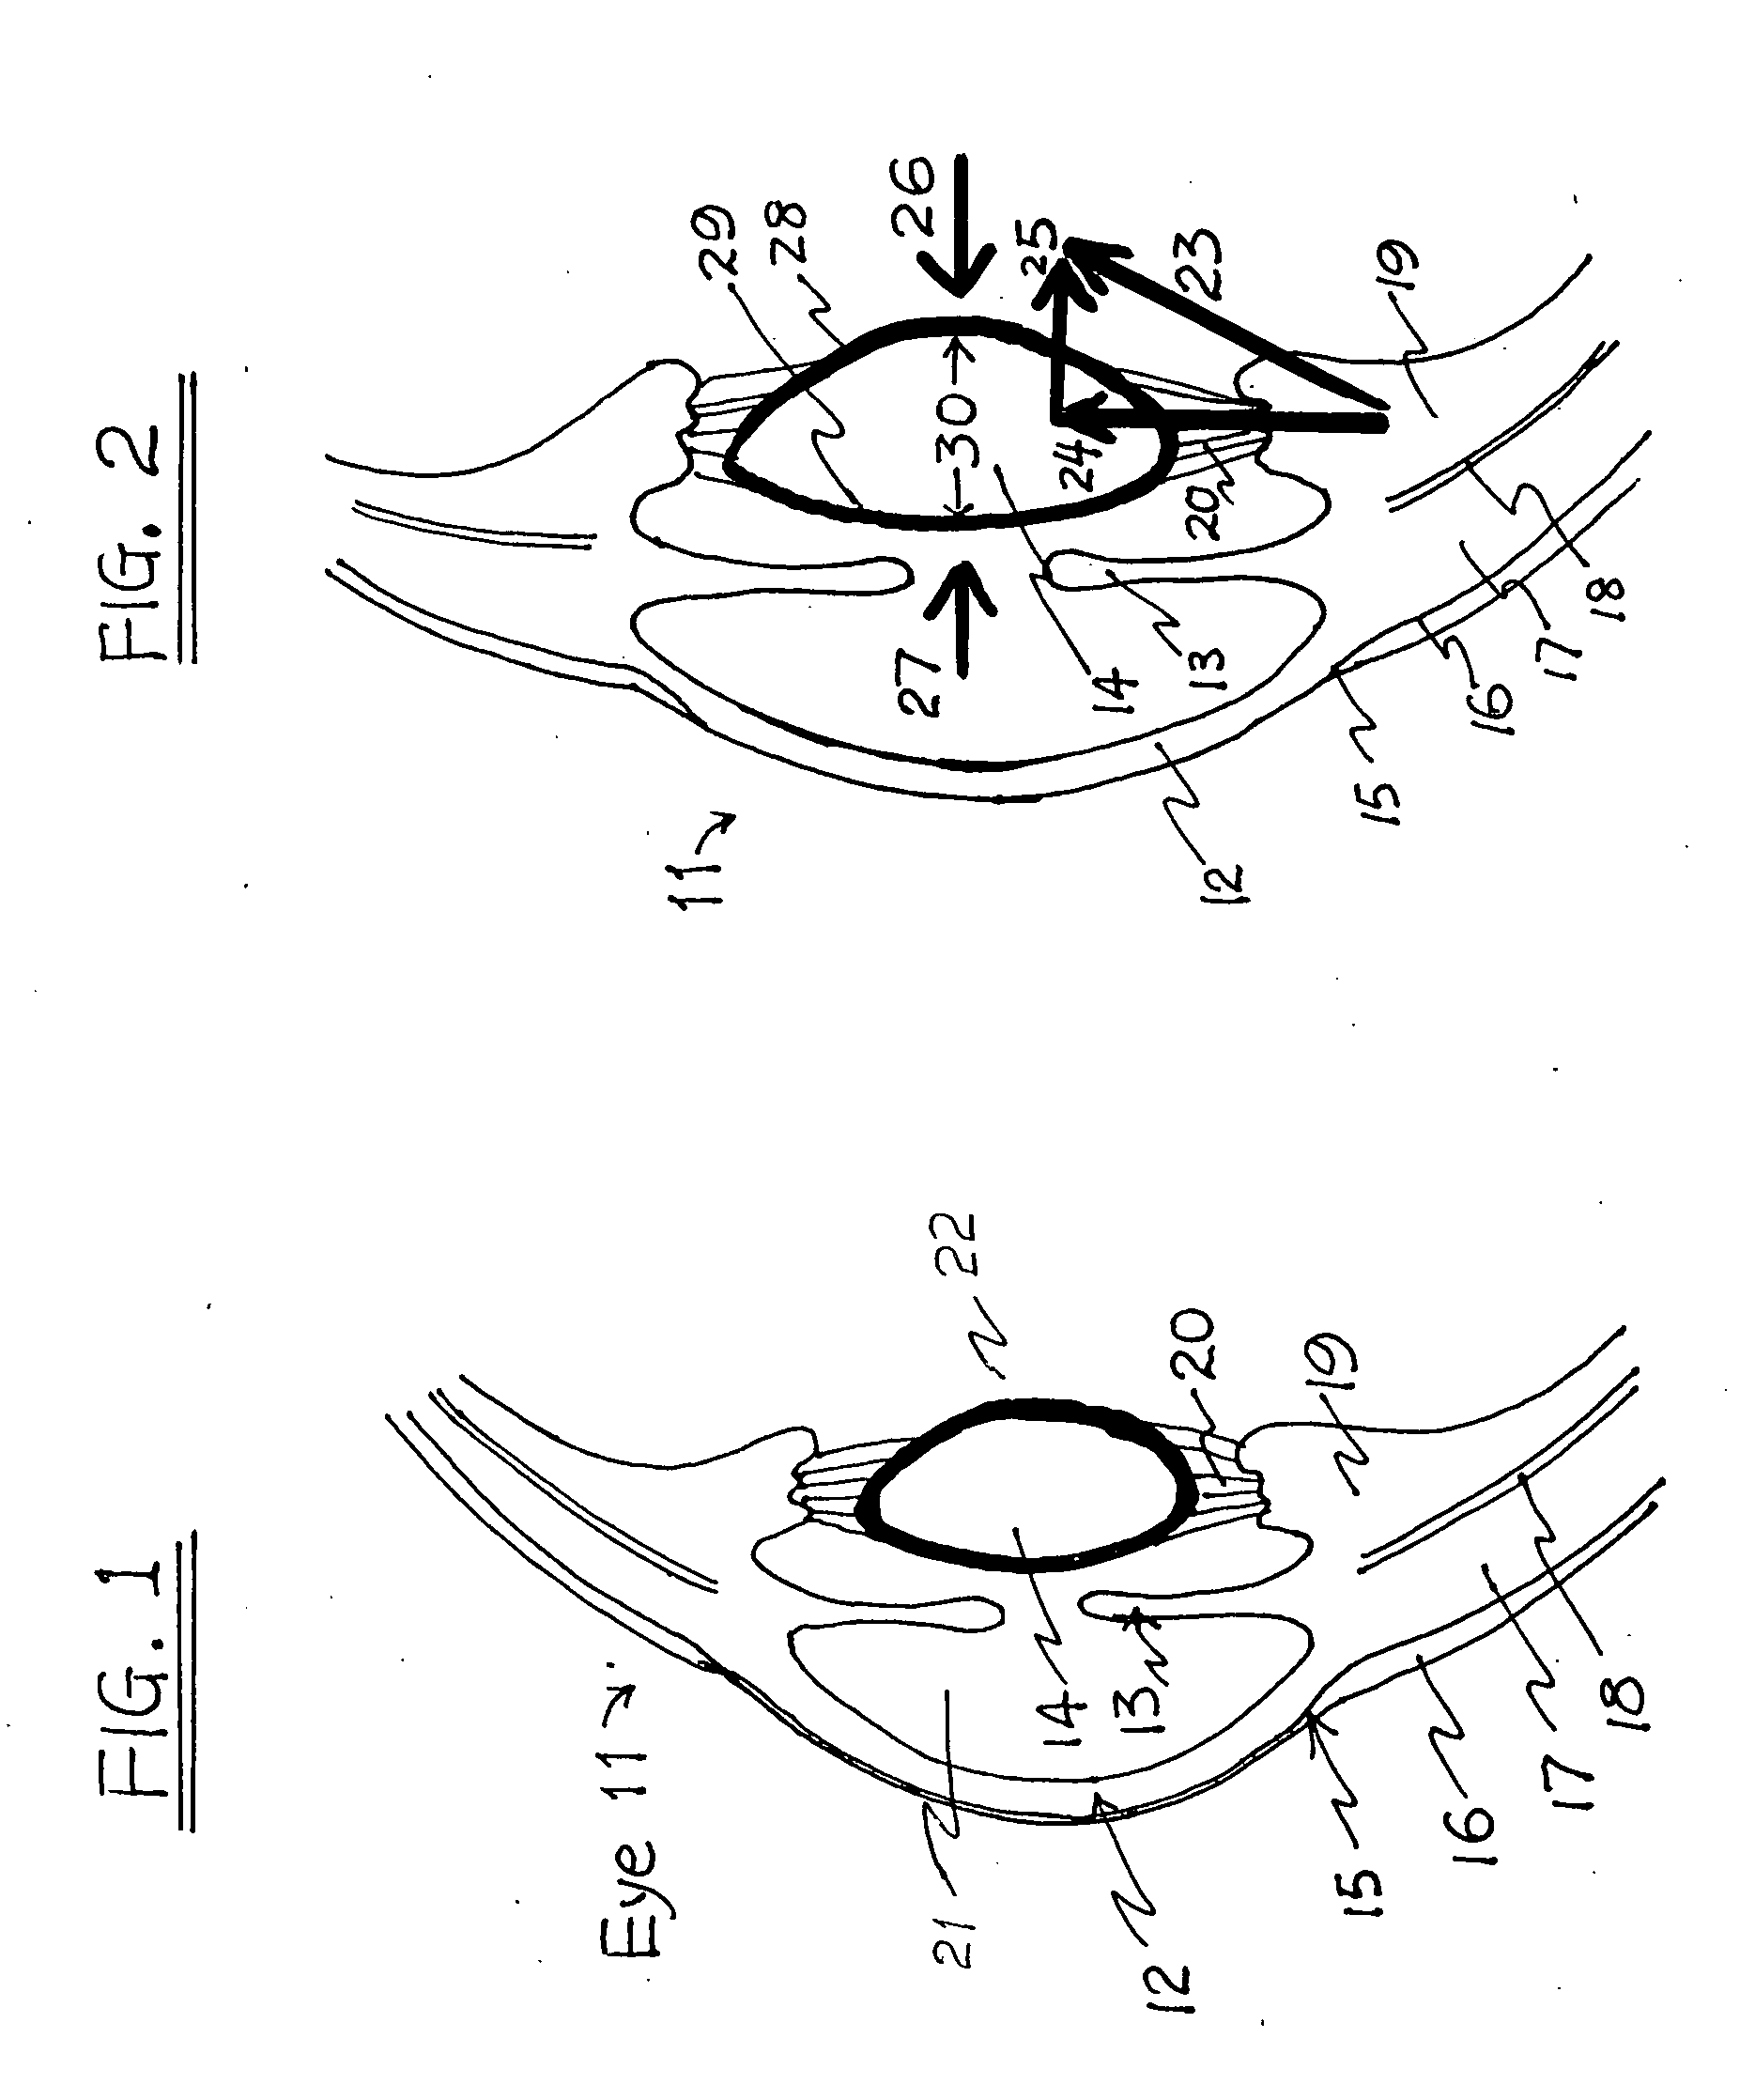 Method and apparatus for the treatment of presbyopia and glaucoma by ciliary body ablation